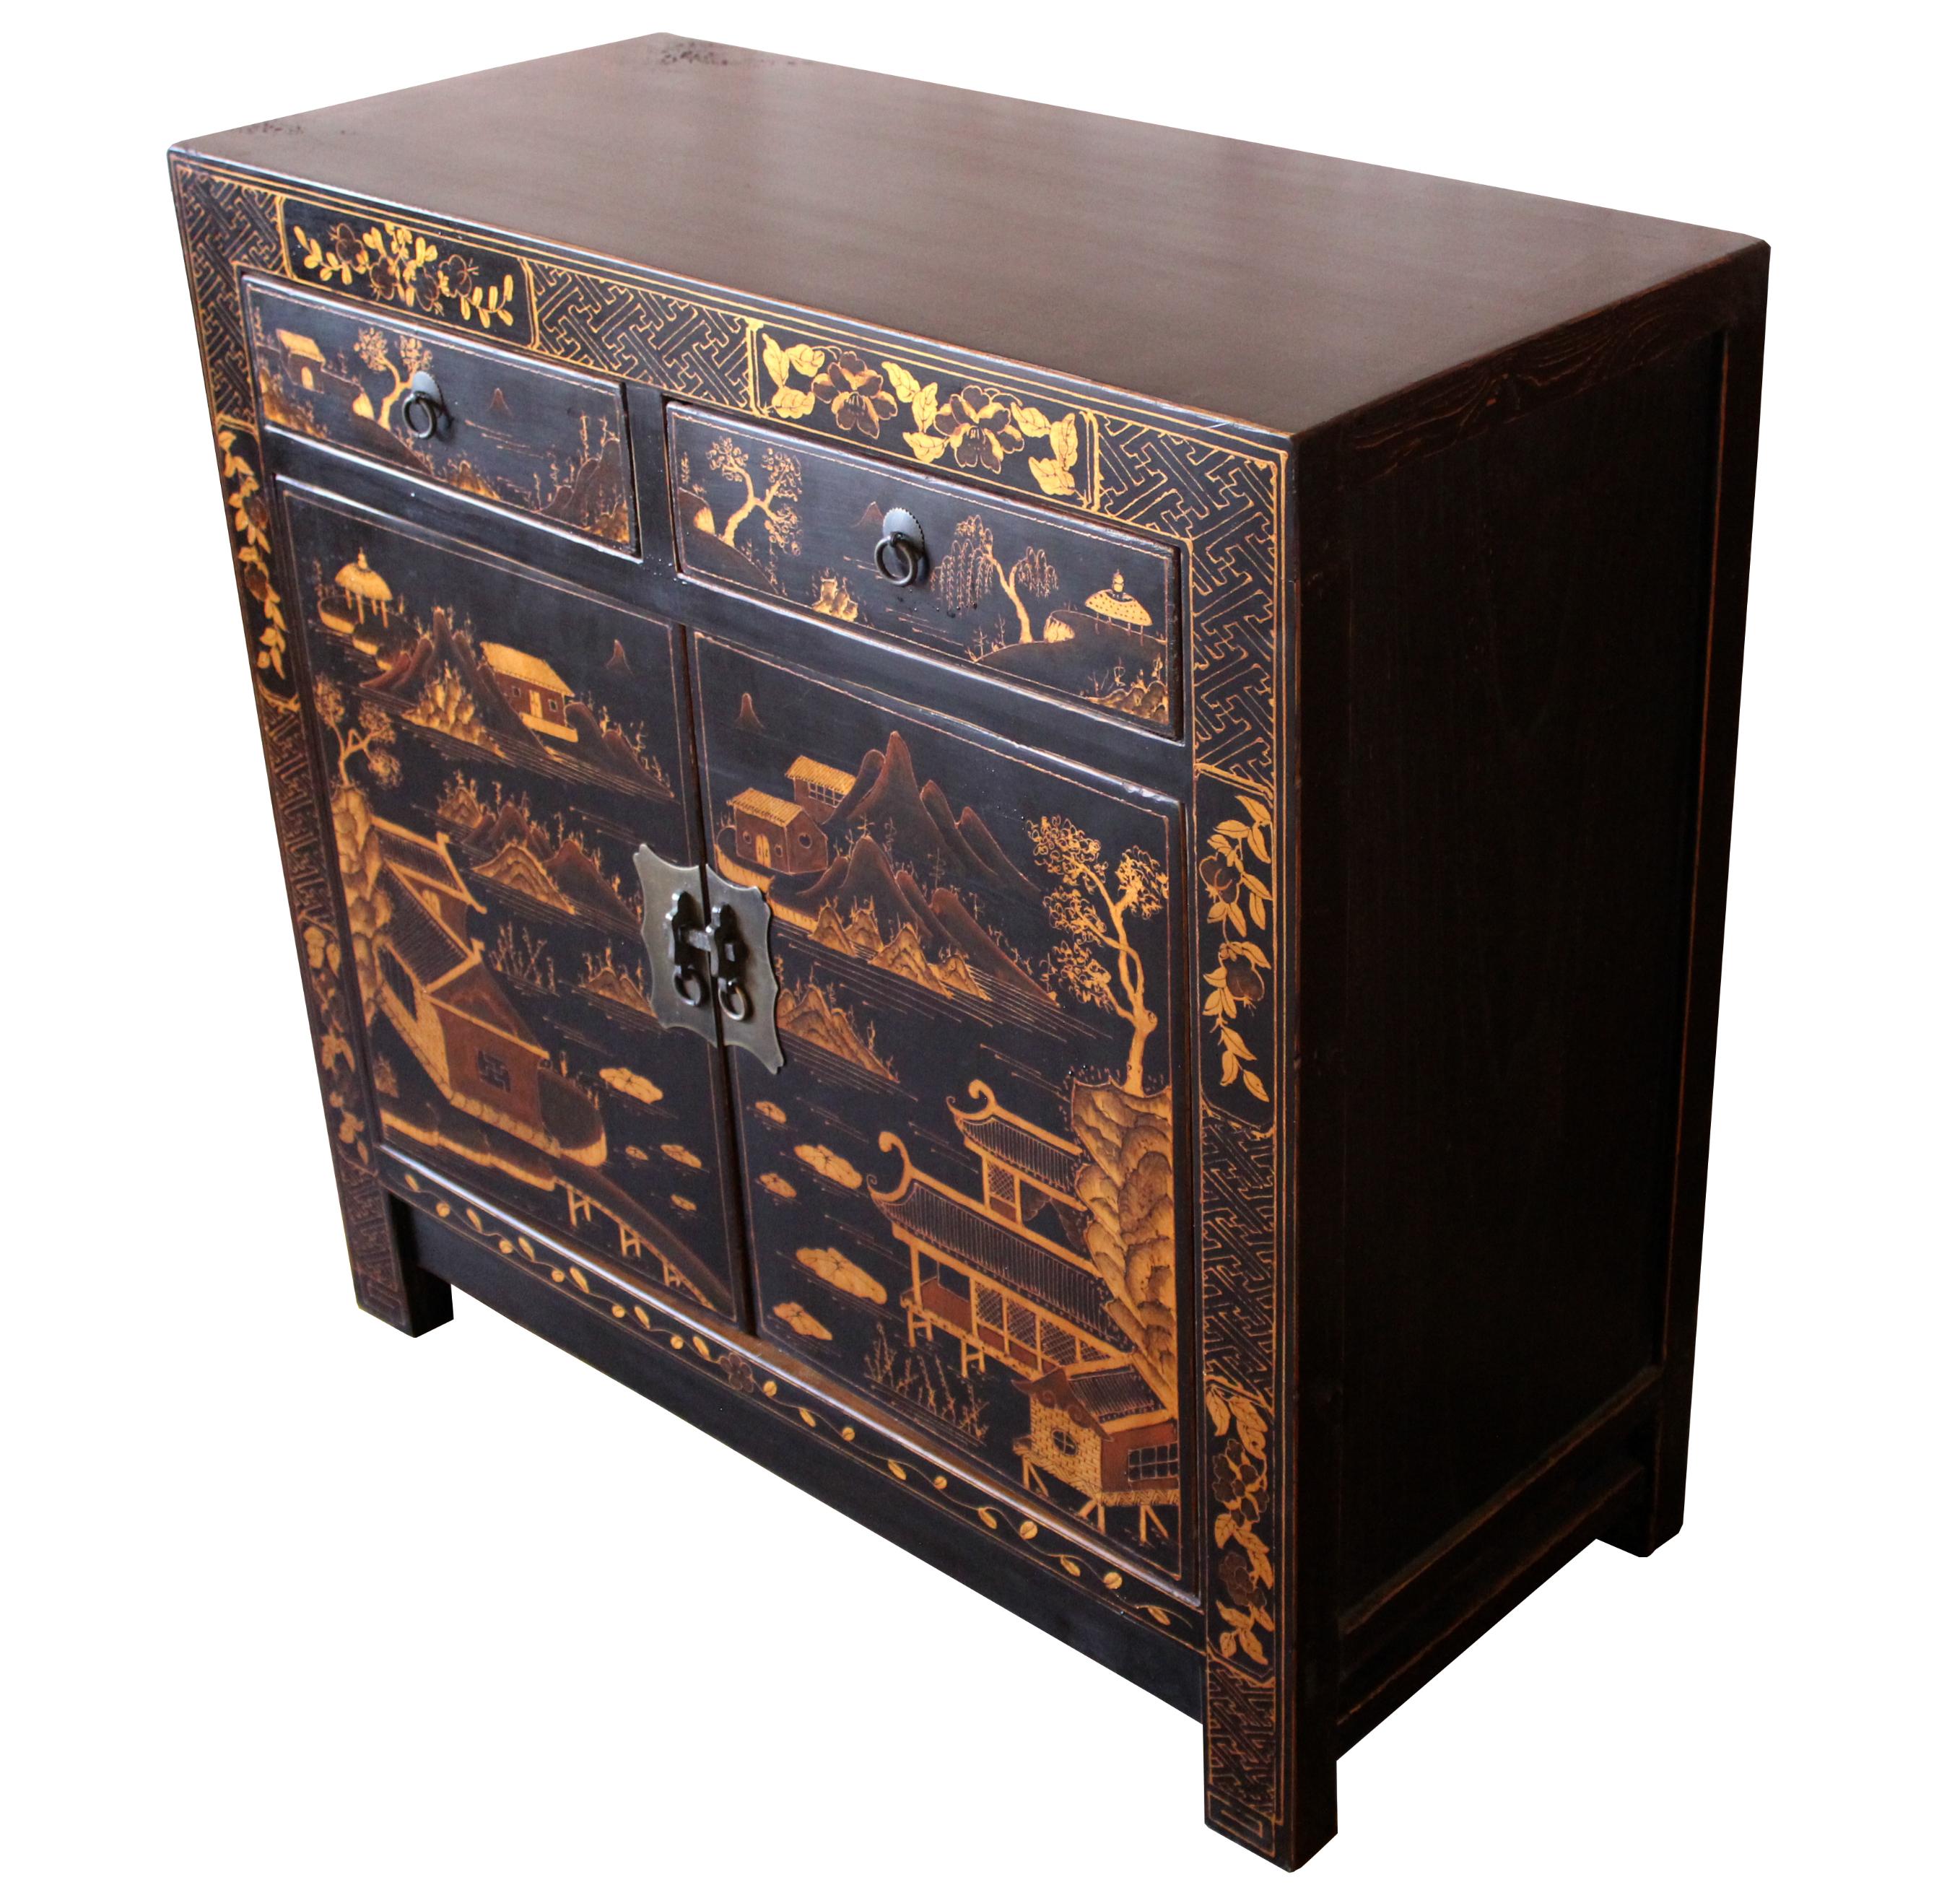 This vintage gilt painted cabinet on black lacquer will be an exquisite showpiece in a traditional living room or dining room. The elaborately painted houses surrounded by lake, small hills, and trees adorns two-door panels and two-drawer fronts.